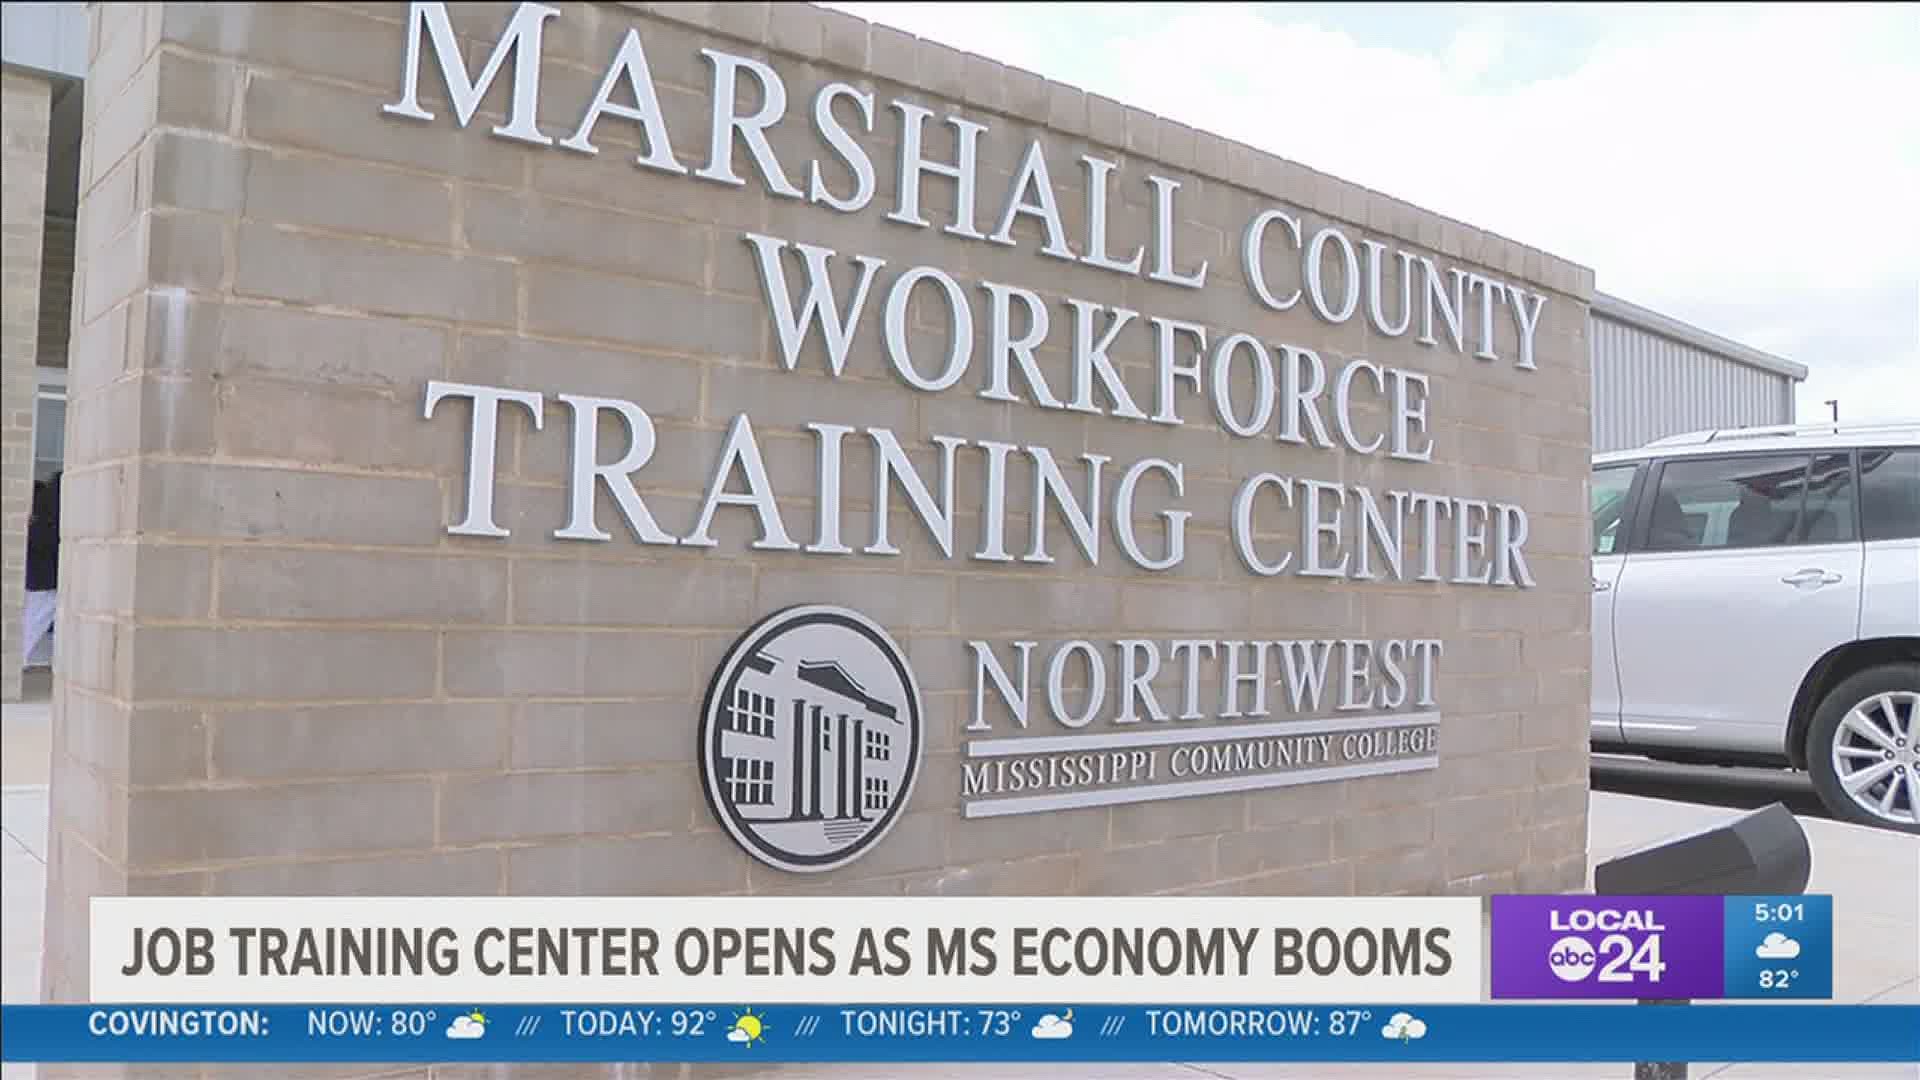 Northwest Mississippi Community College students are getting a variety of vocational training opportunities as hundreds of jobs come online in Byhalia, MS area.